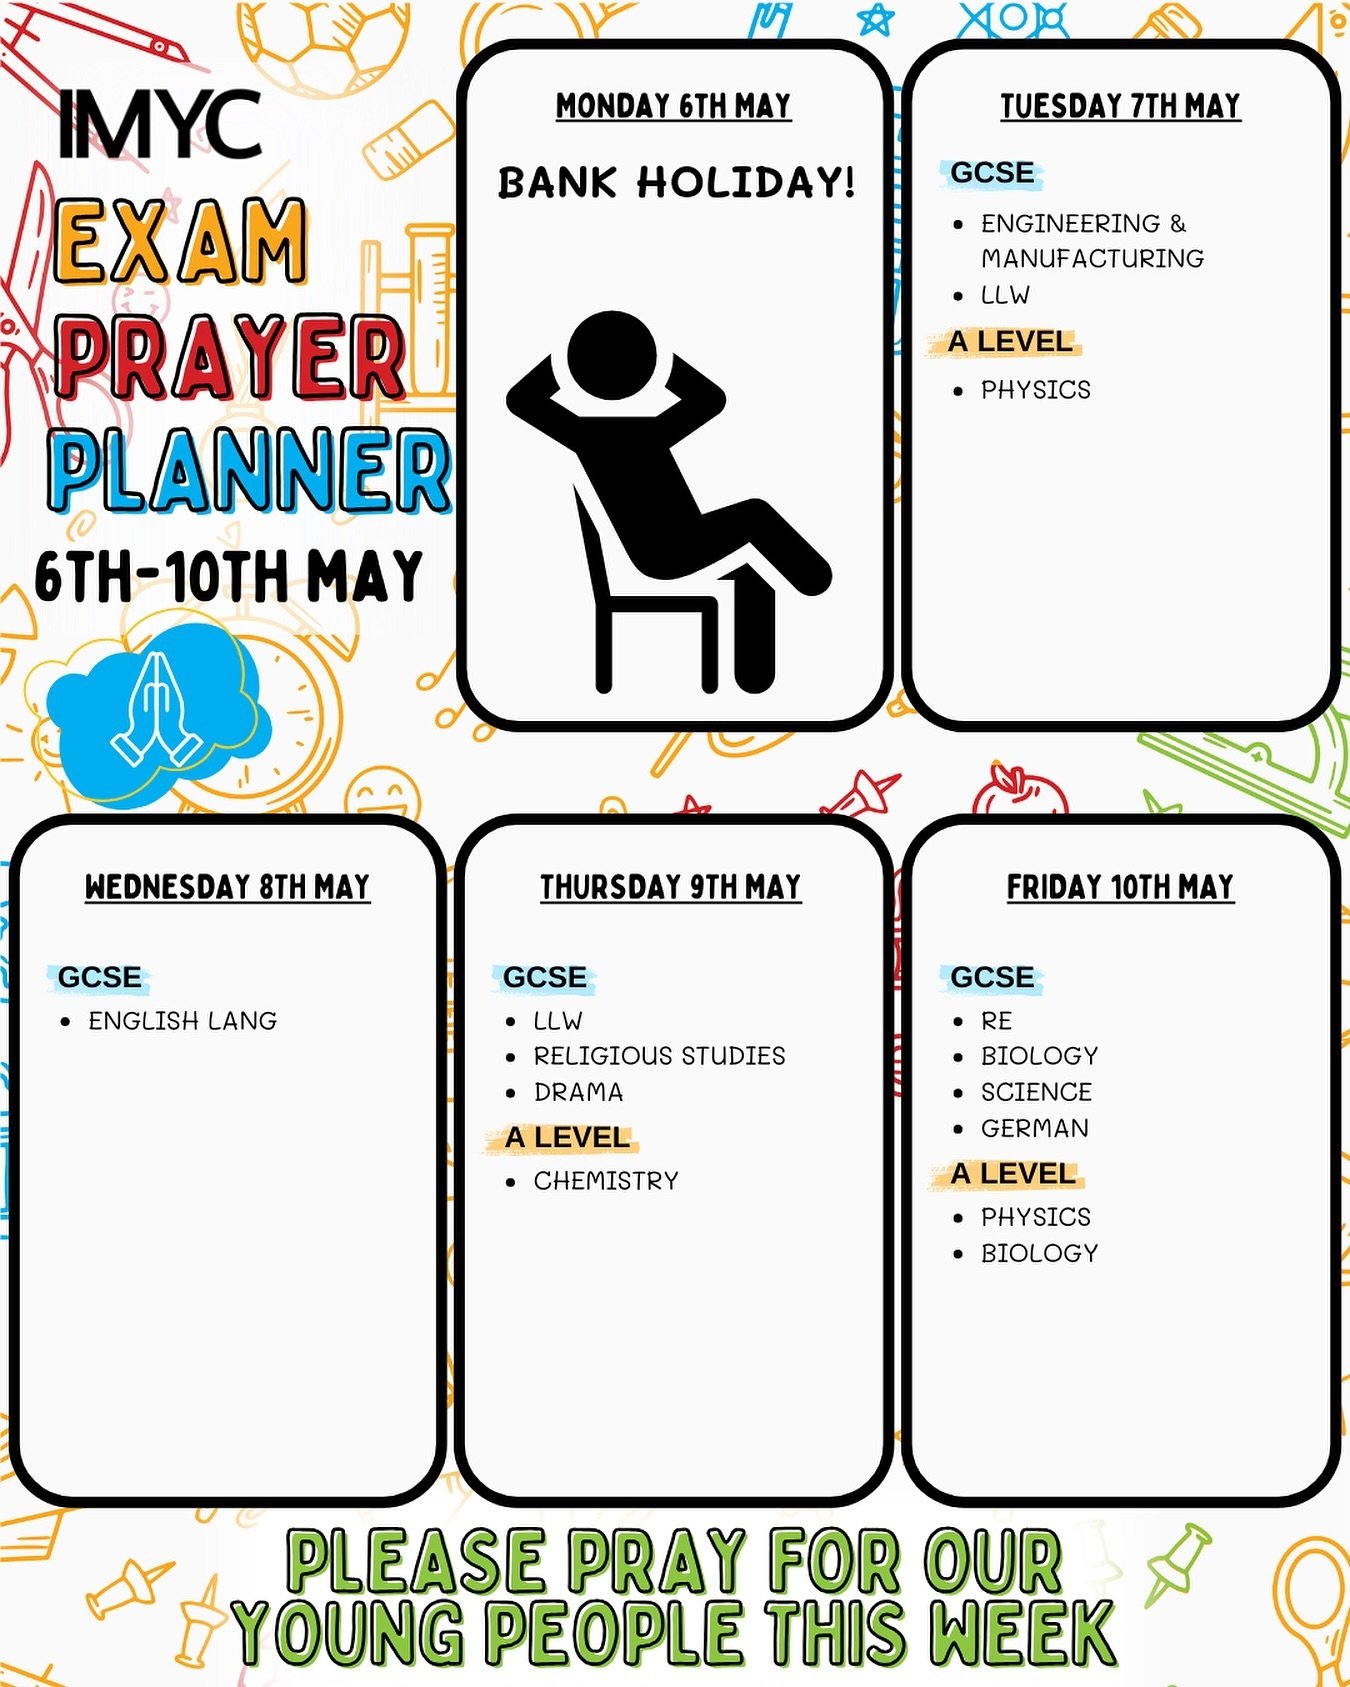 Exam season begins this week!! 📝
For many of you, May and June will be FILLED with revision, exams, and more revision!

Each week we will be posting our Exam Prayer Planner, laying out the exams for the week.
We encourage you to take some time each 